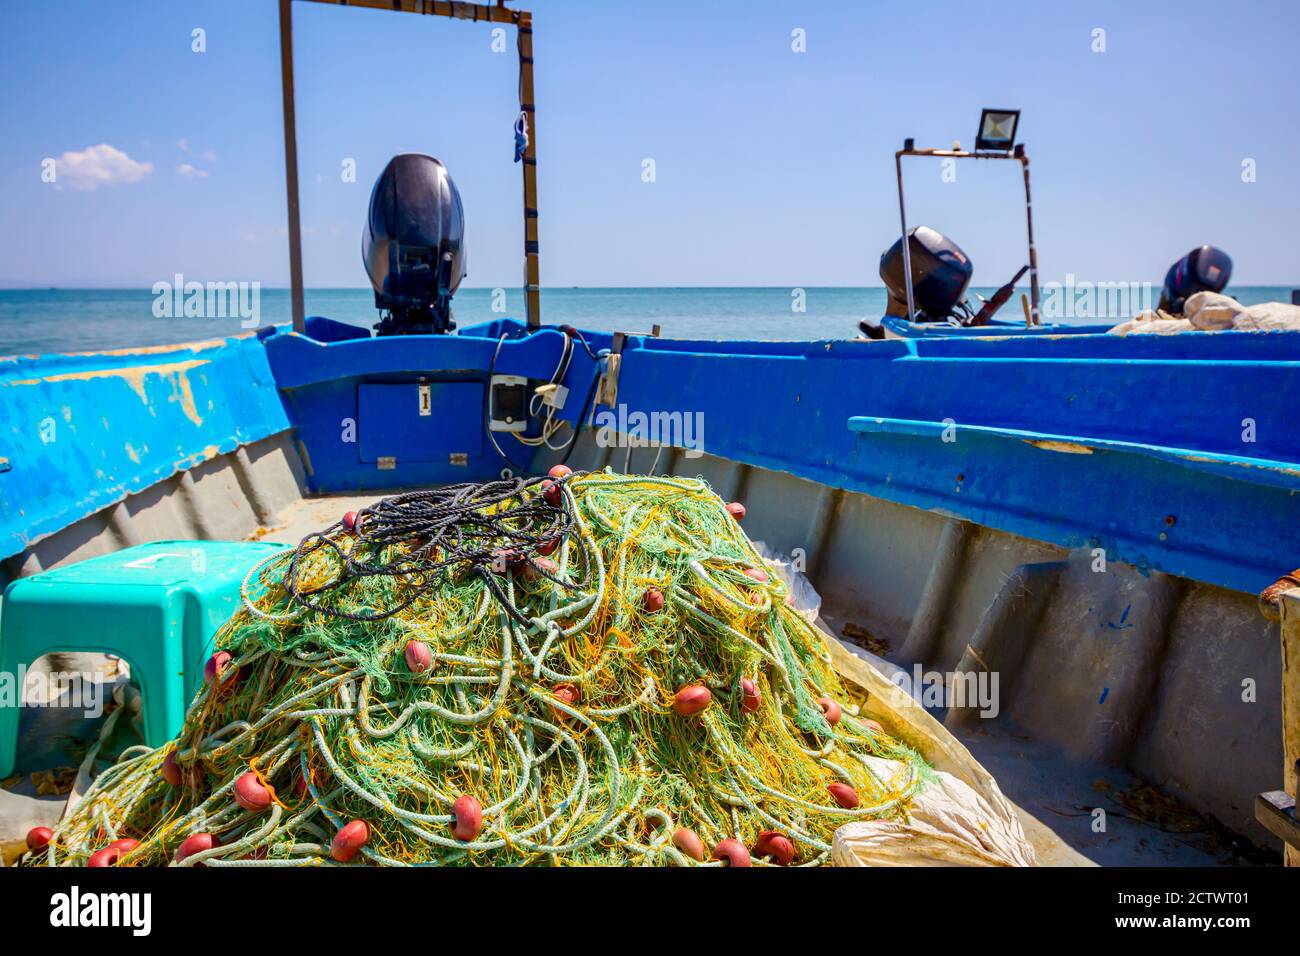 Pile of commercial fishing net, equipment for angling at open sea